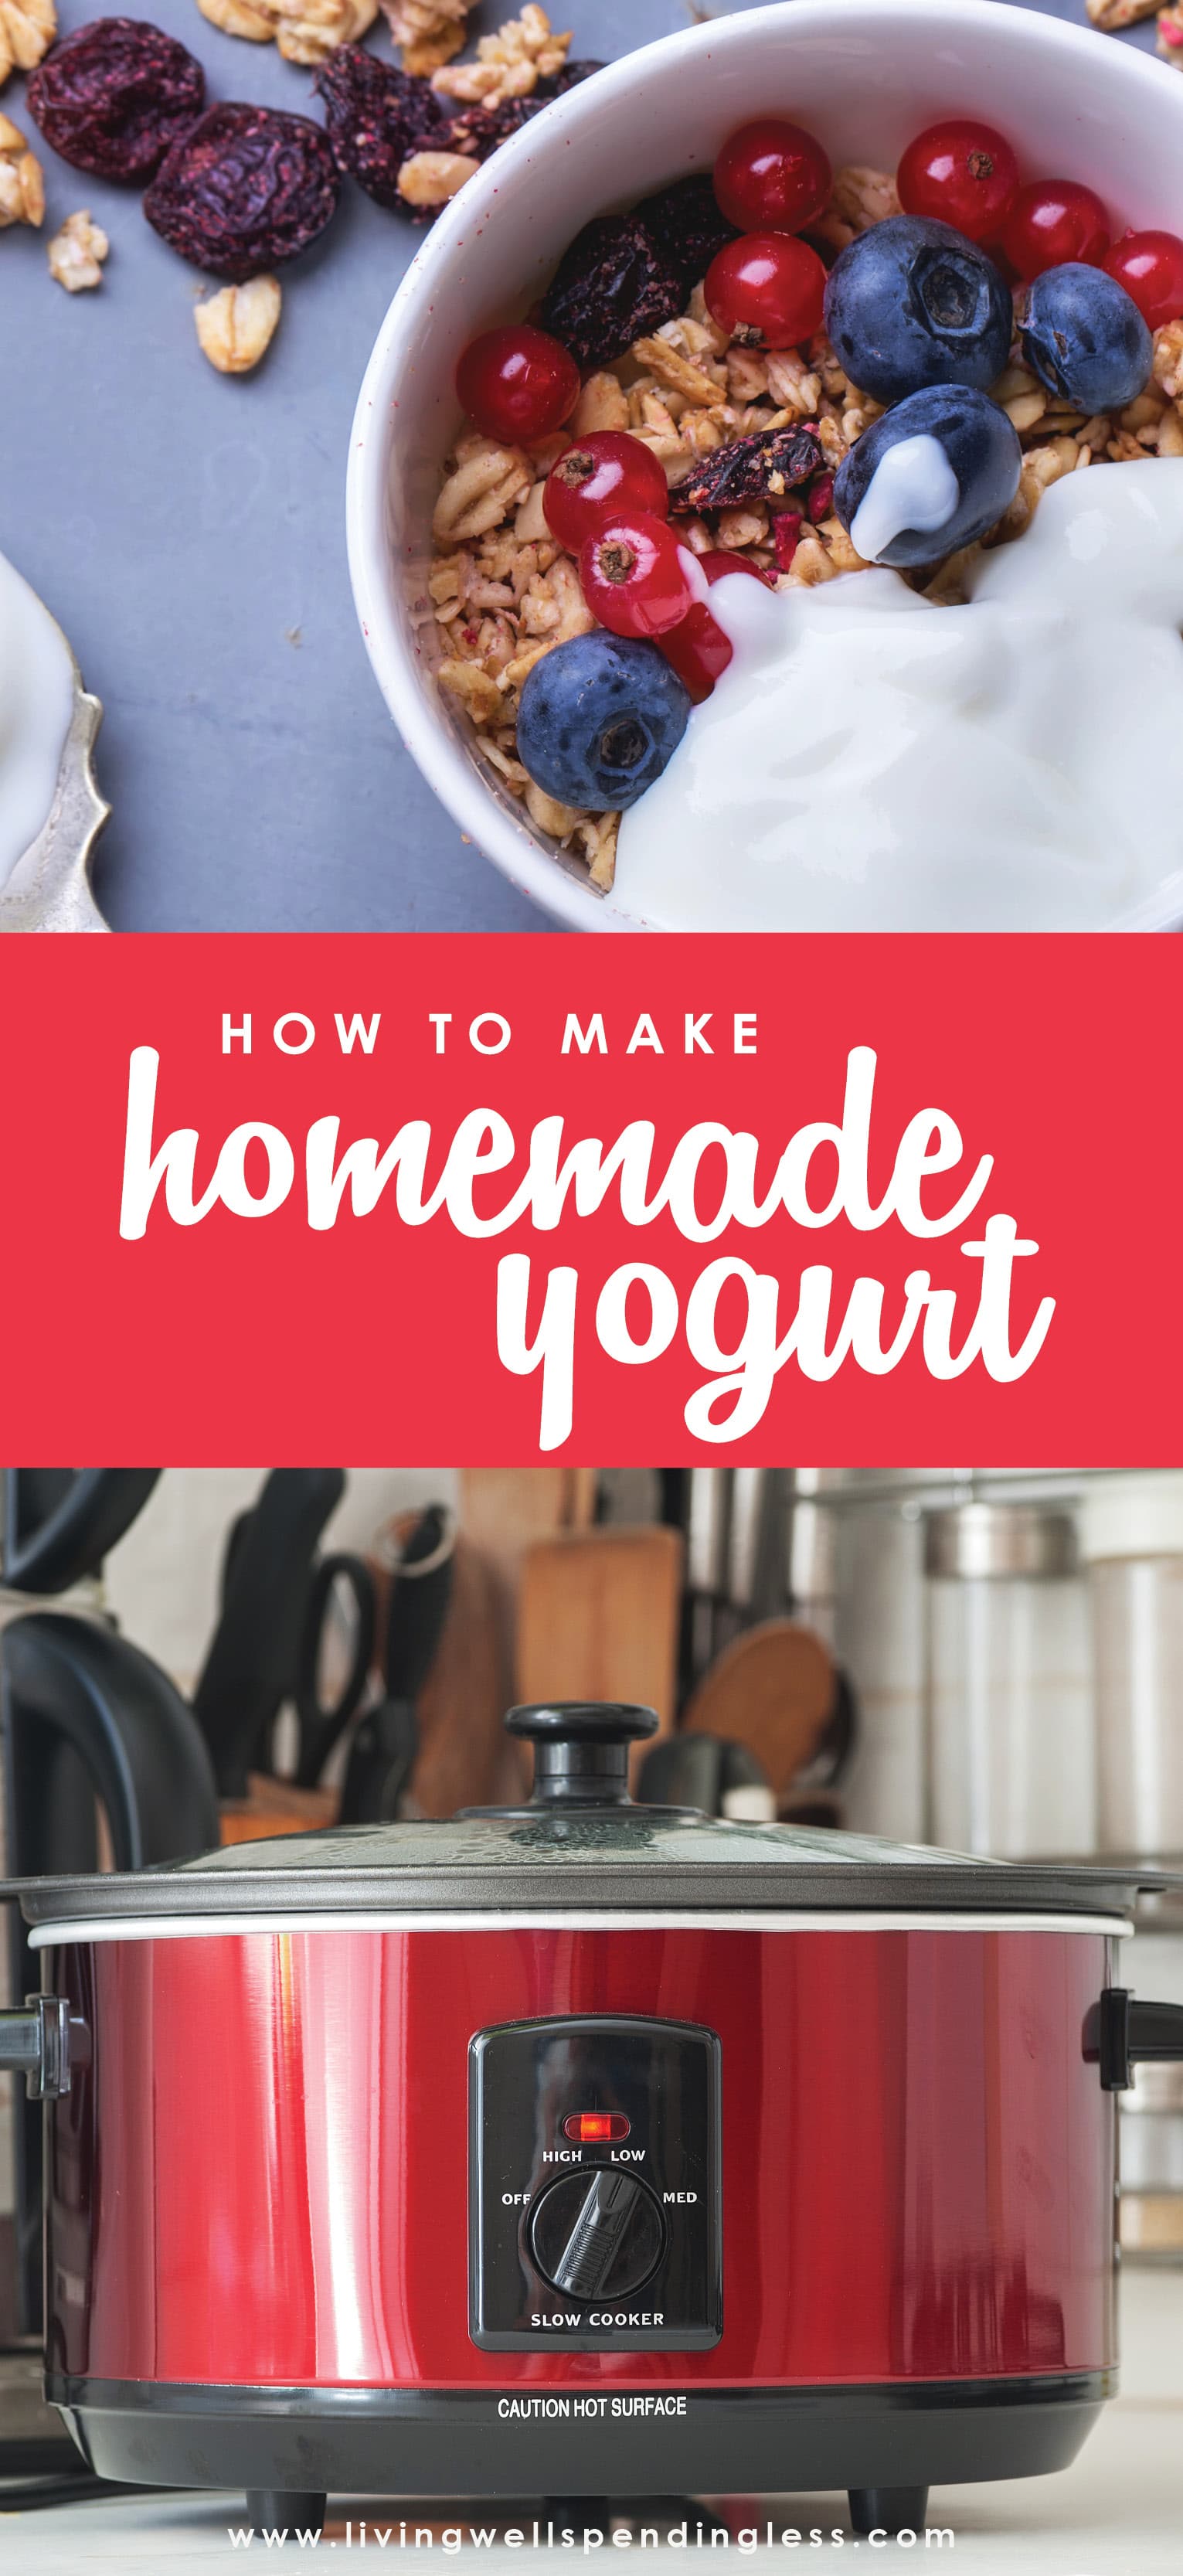 Looking for an easy and delicious homemade yogurt recipe? Here's how to make homemade yogurt in both a crockpot & Instant Pot - both super easy!